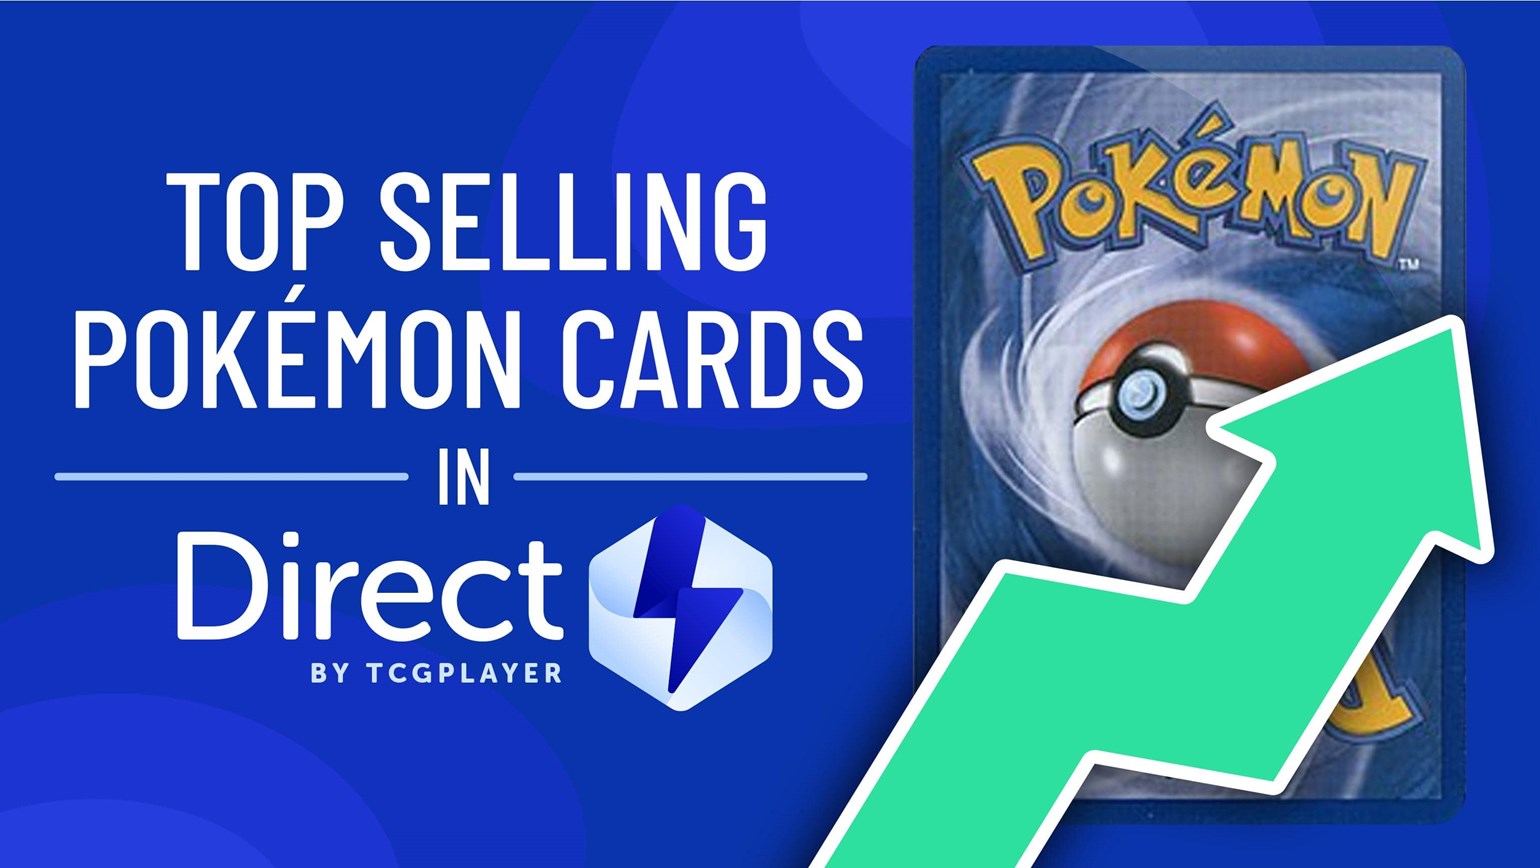 November Top Selling Pokémon Cards Under $25 in Direct by TCGplayer